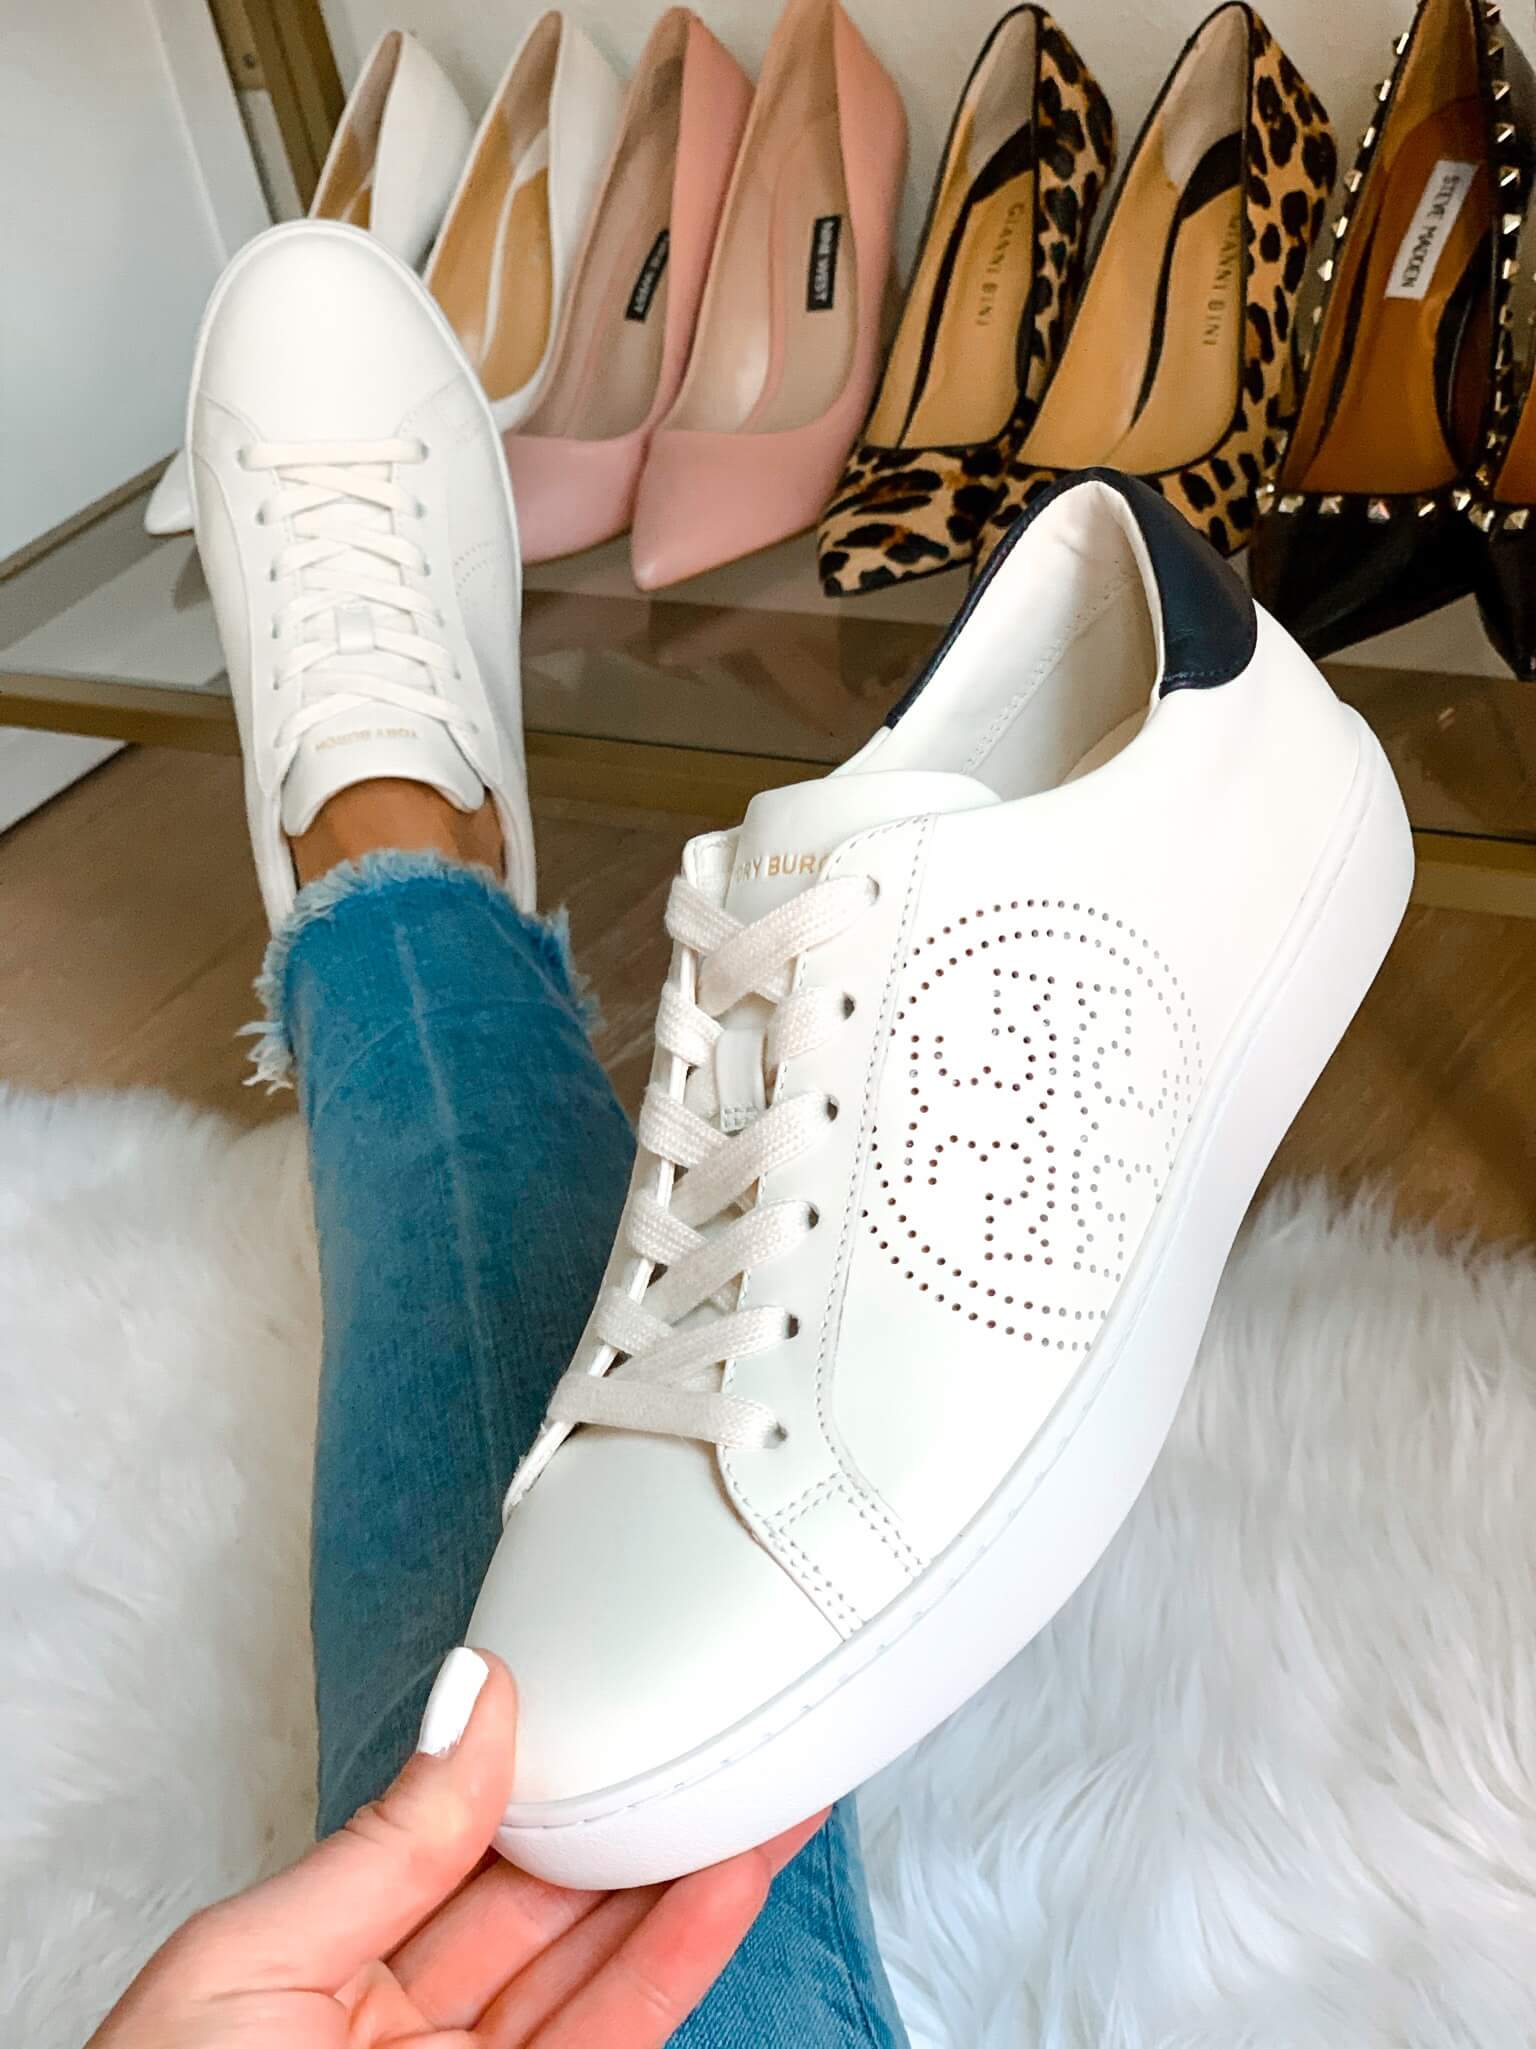 NSALE 2021 Favorite Shoes Review | Tory Burch & More + Giveaway! - The  Double Take Girls